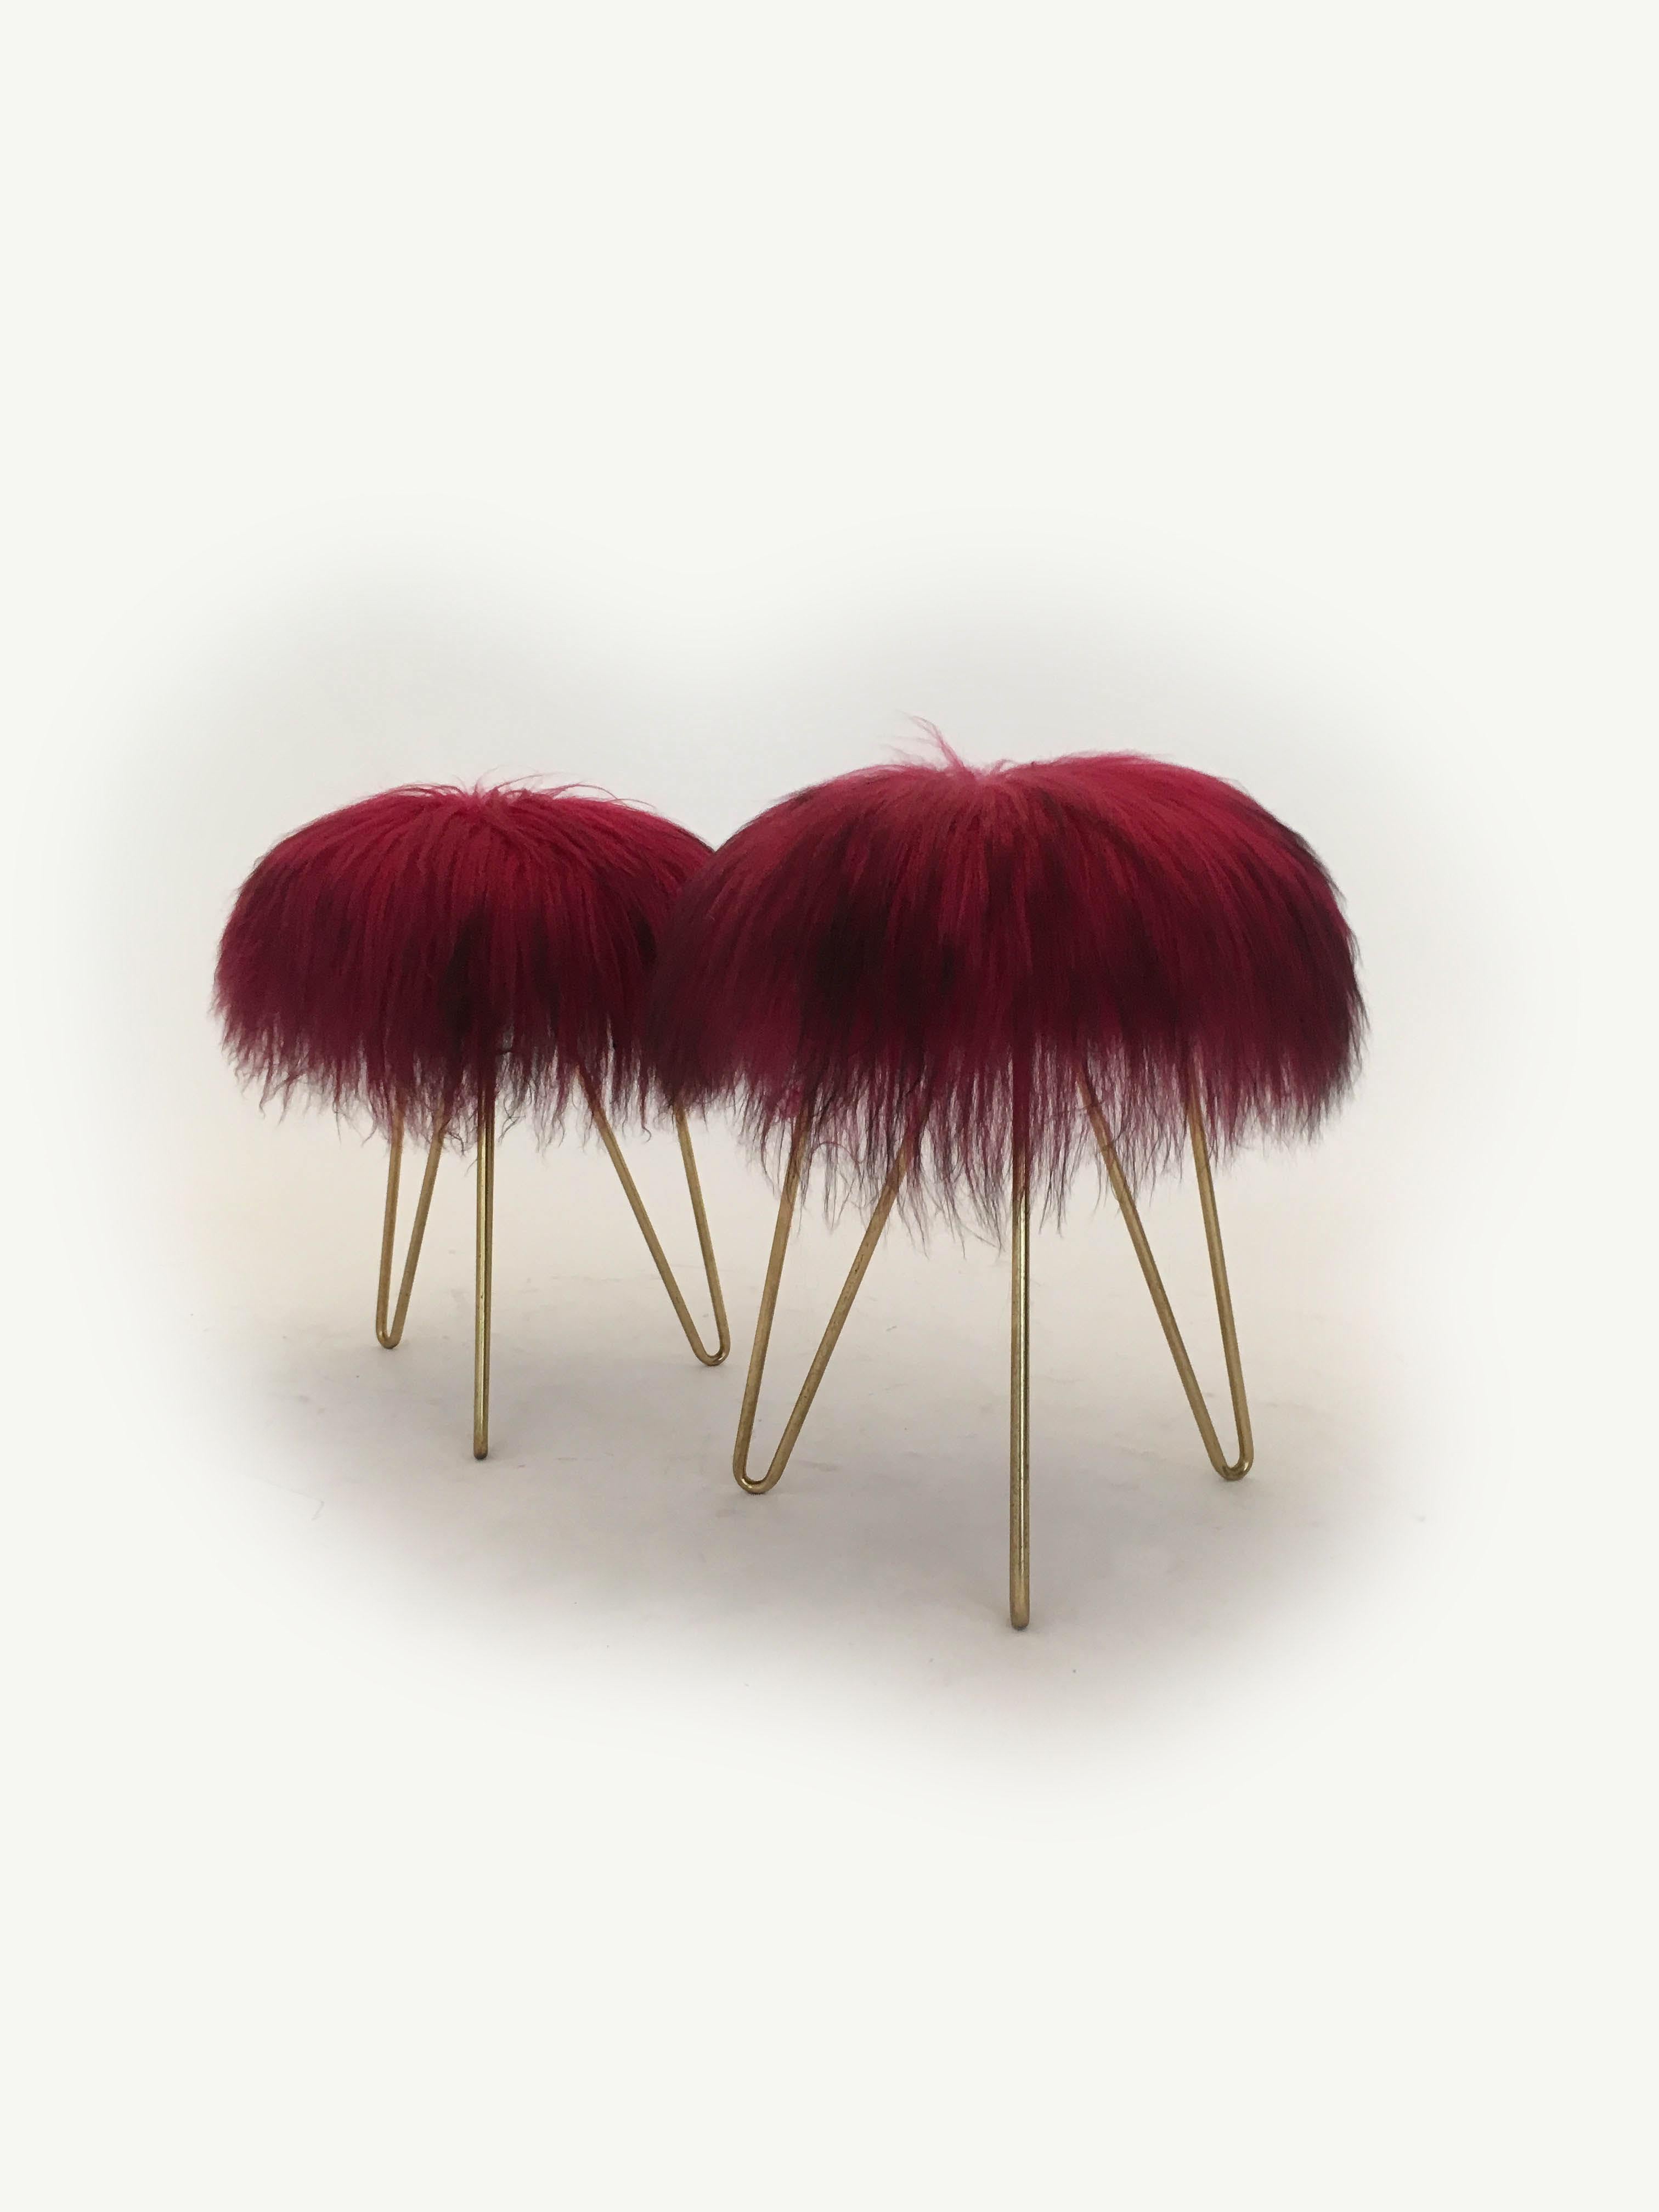 Sheep Fur Stools, France, 1950s For Sale 5